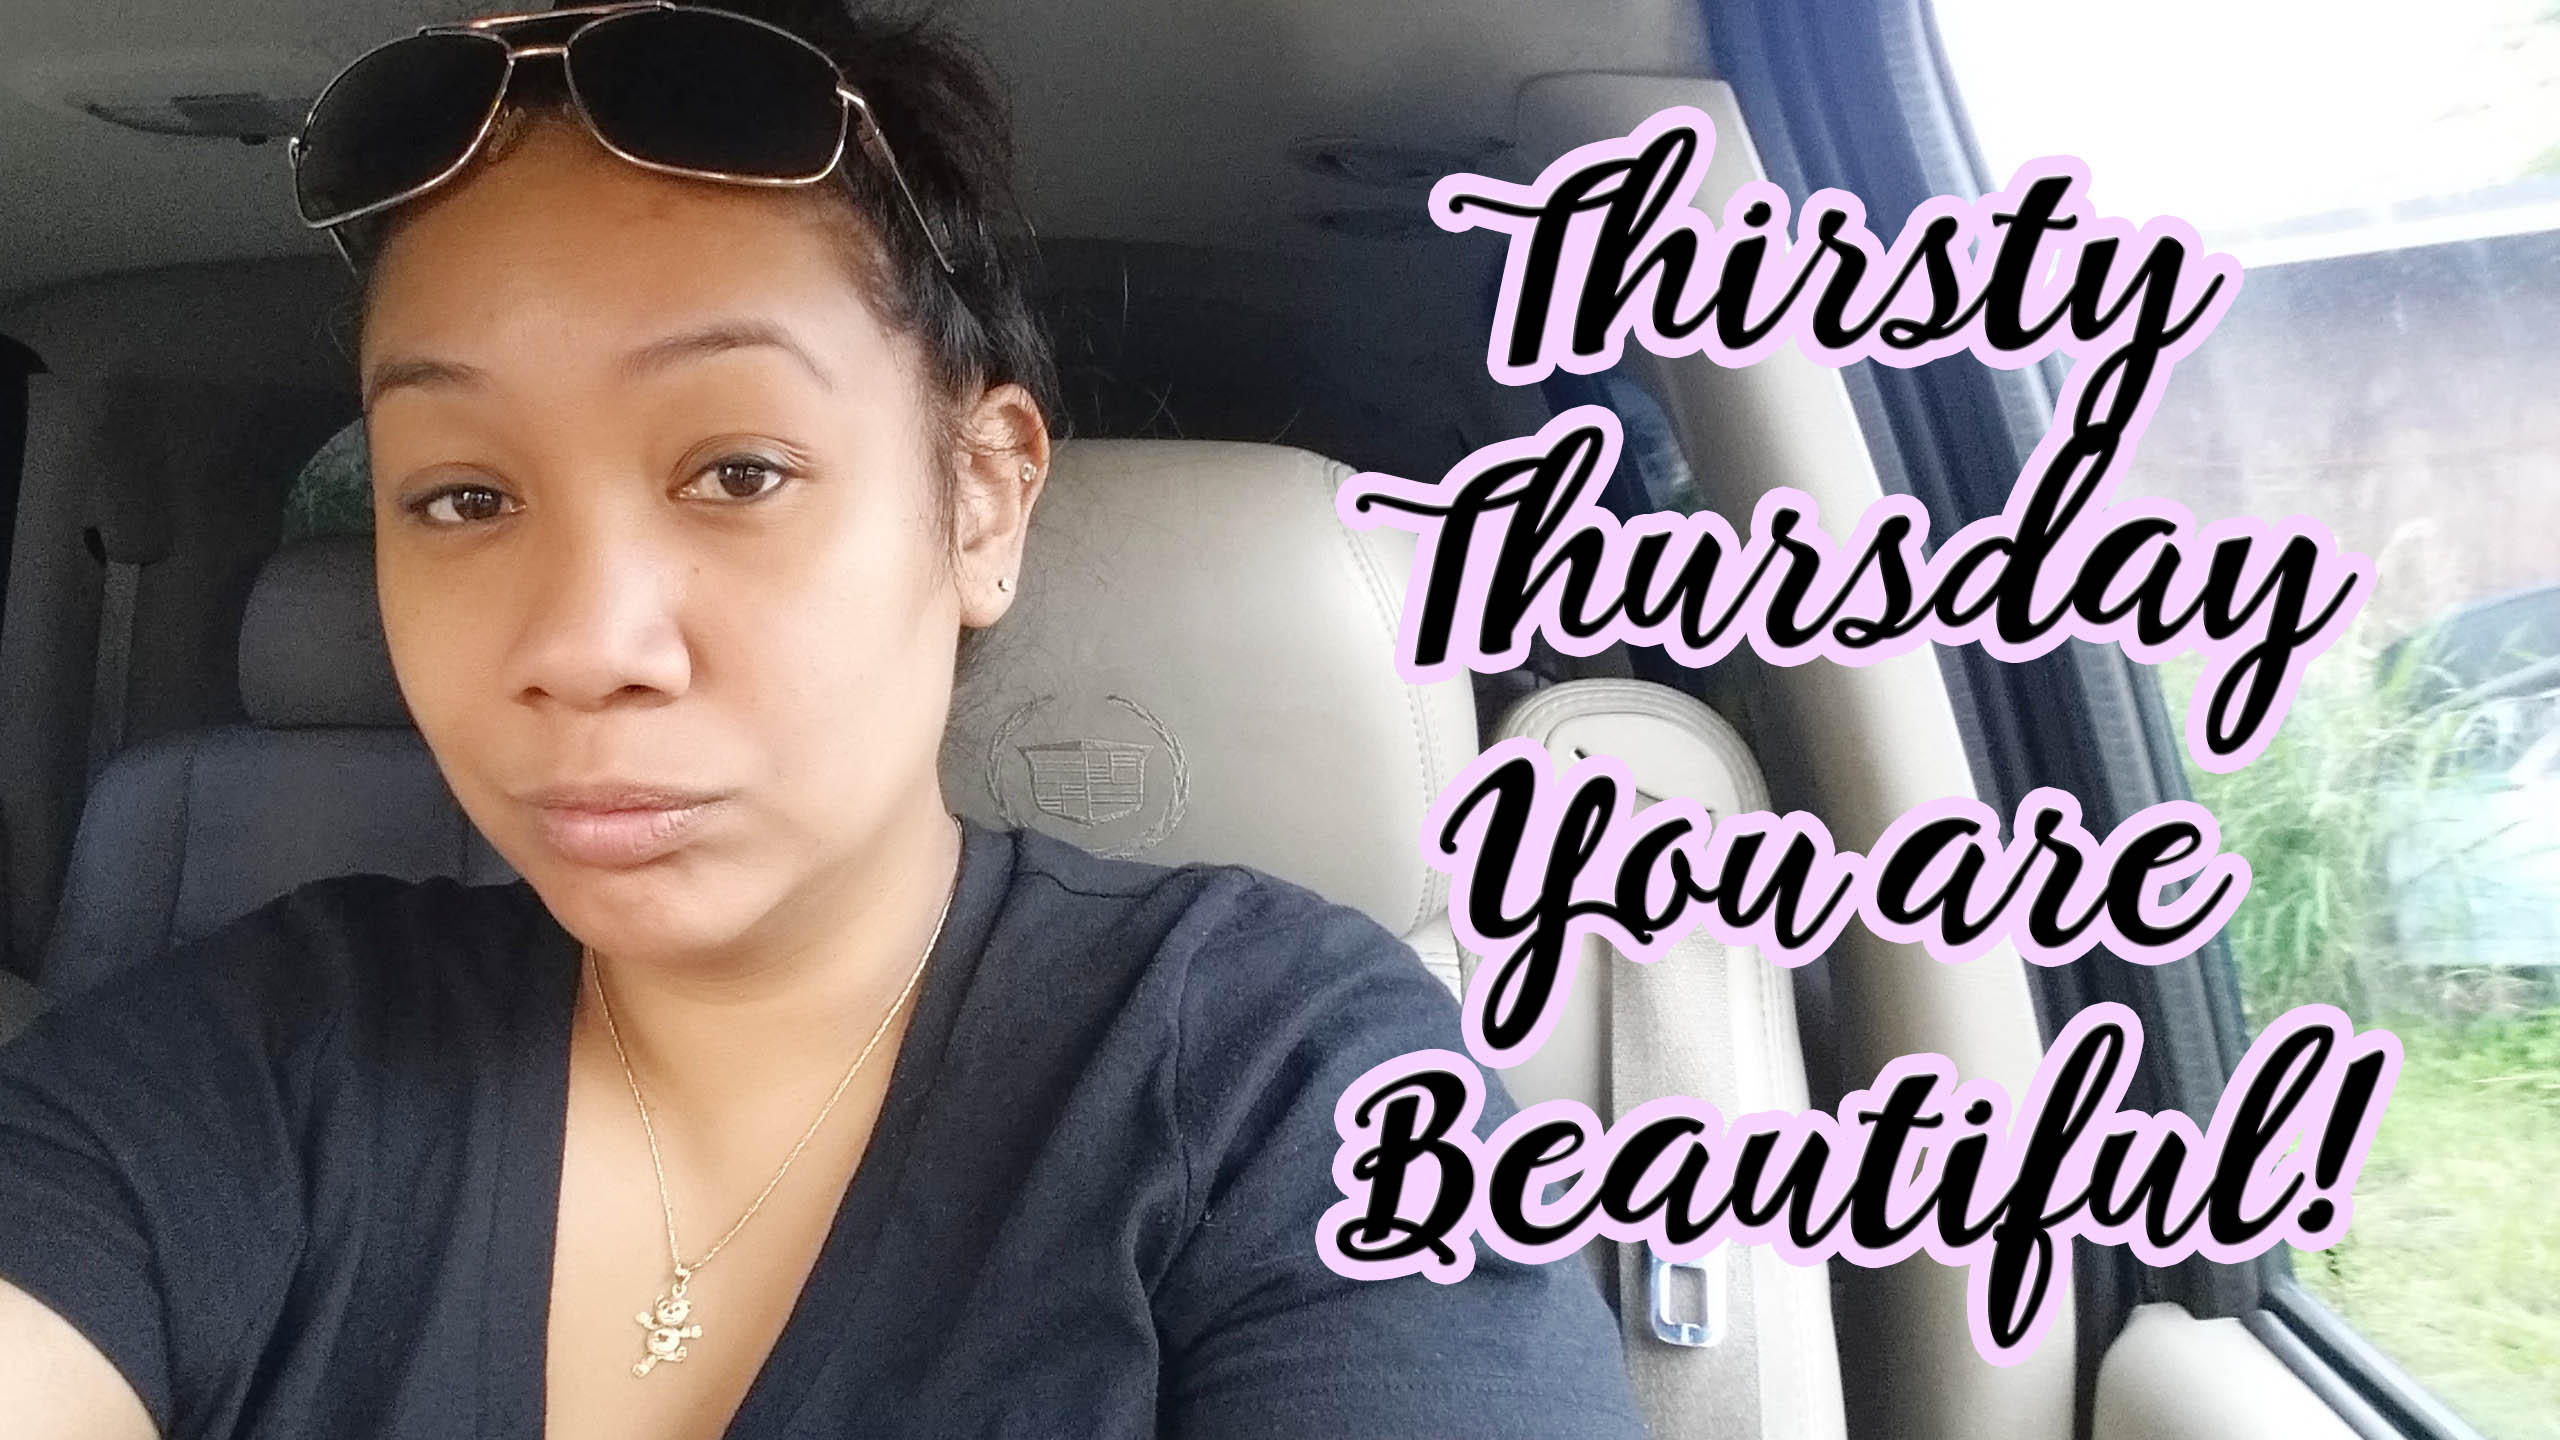  THIRSTY THURSDAY - Updates & Dear Beautiful People | 09.10.15